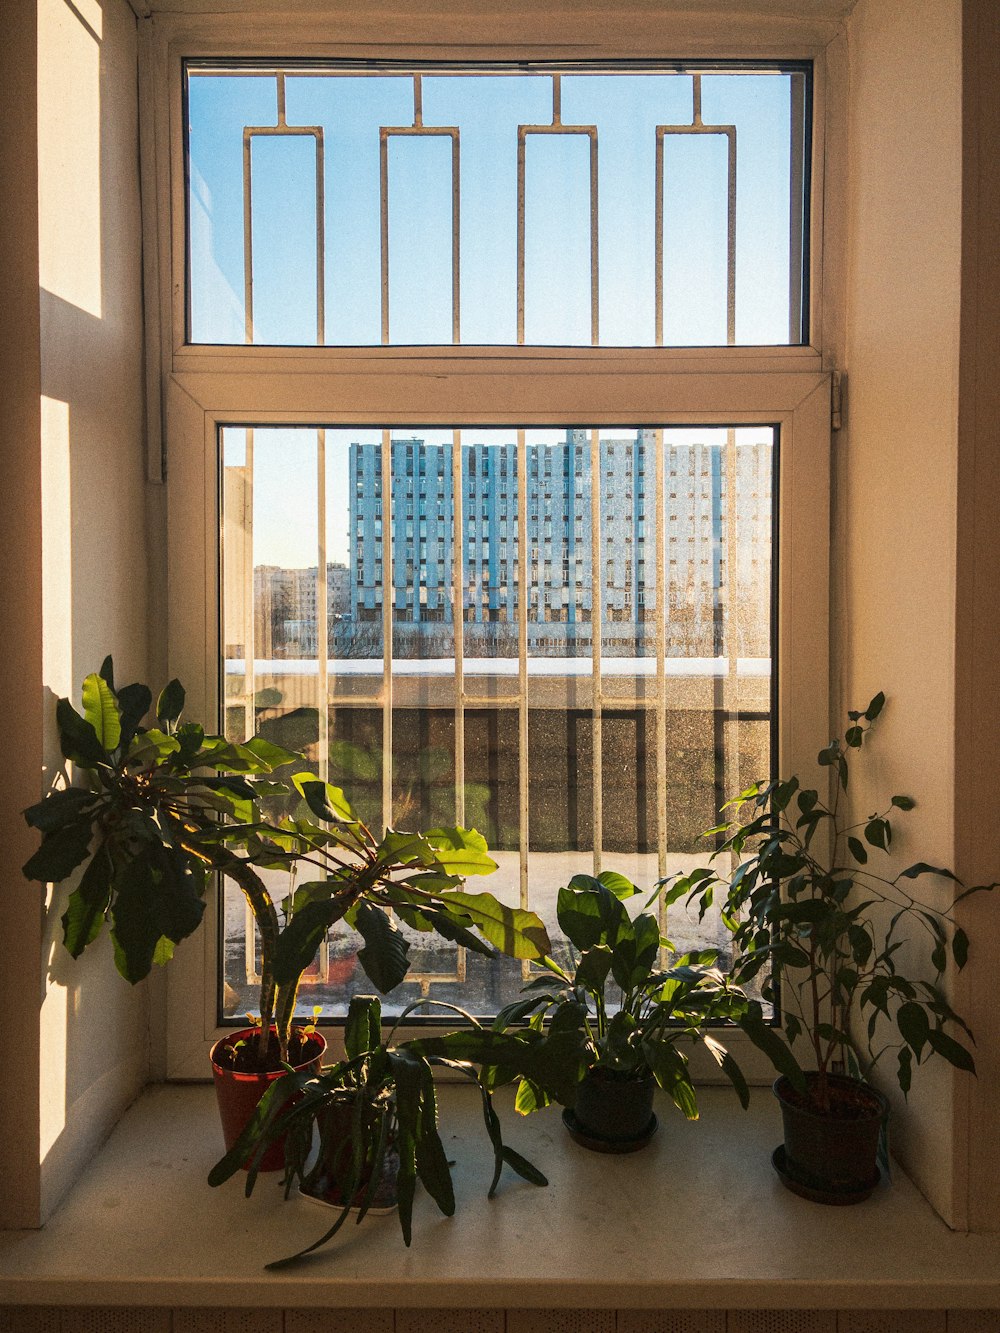 a window sill filled with potted plants next to a window